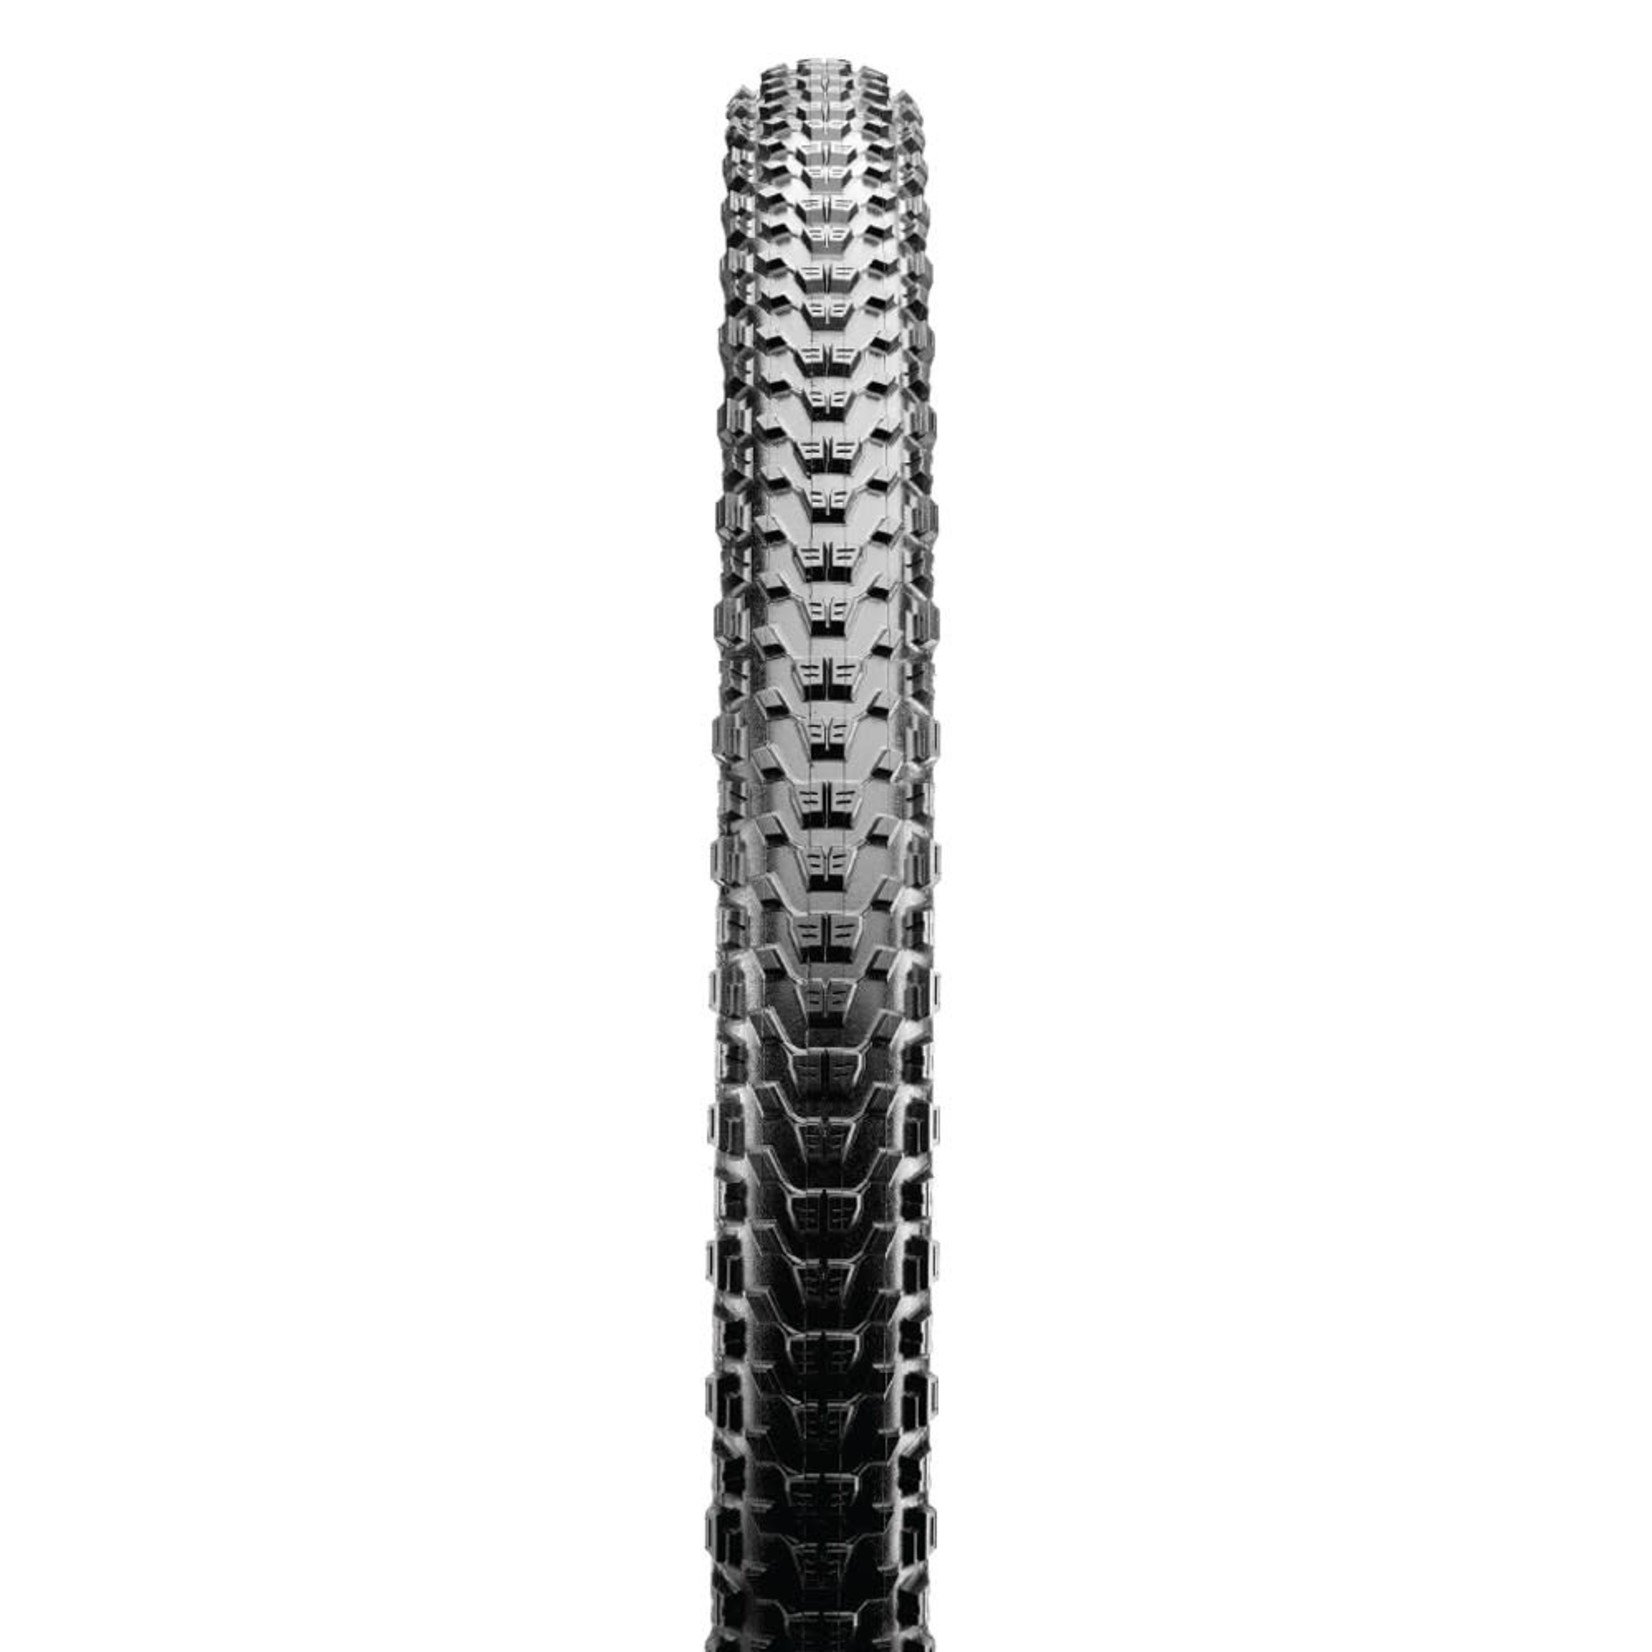 Maxxis Maxxis Ardent Race Bike Tyre - 29 X 2.35 - 3C Speed EXO TR Folding 120TPI - Pair